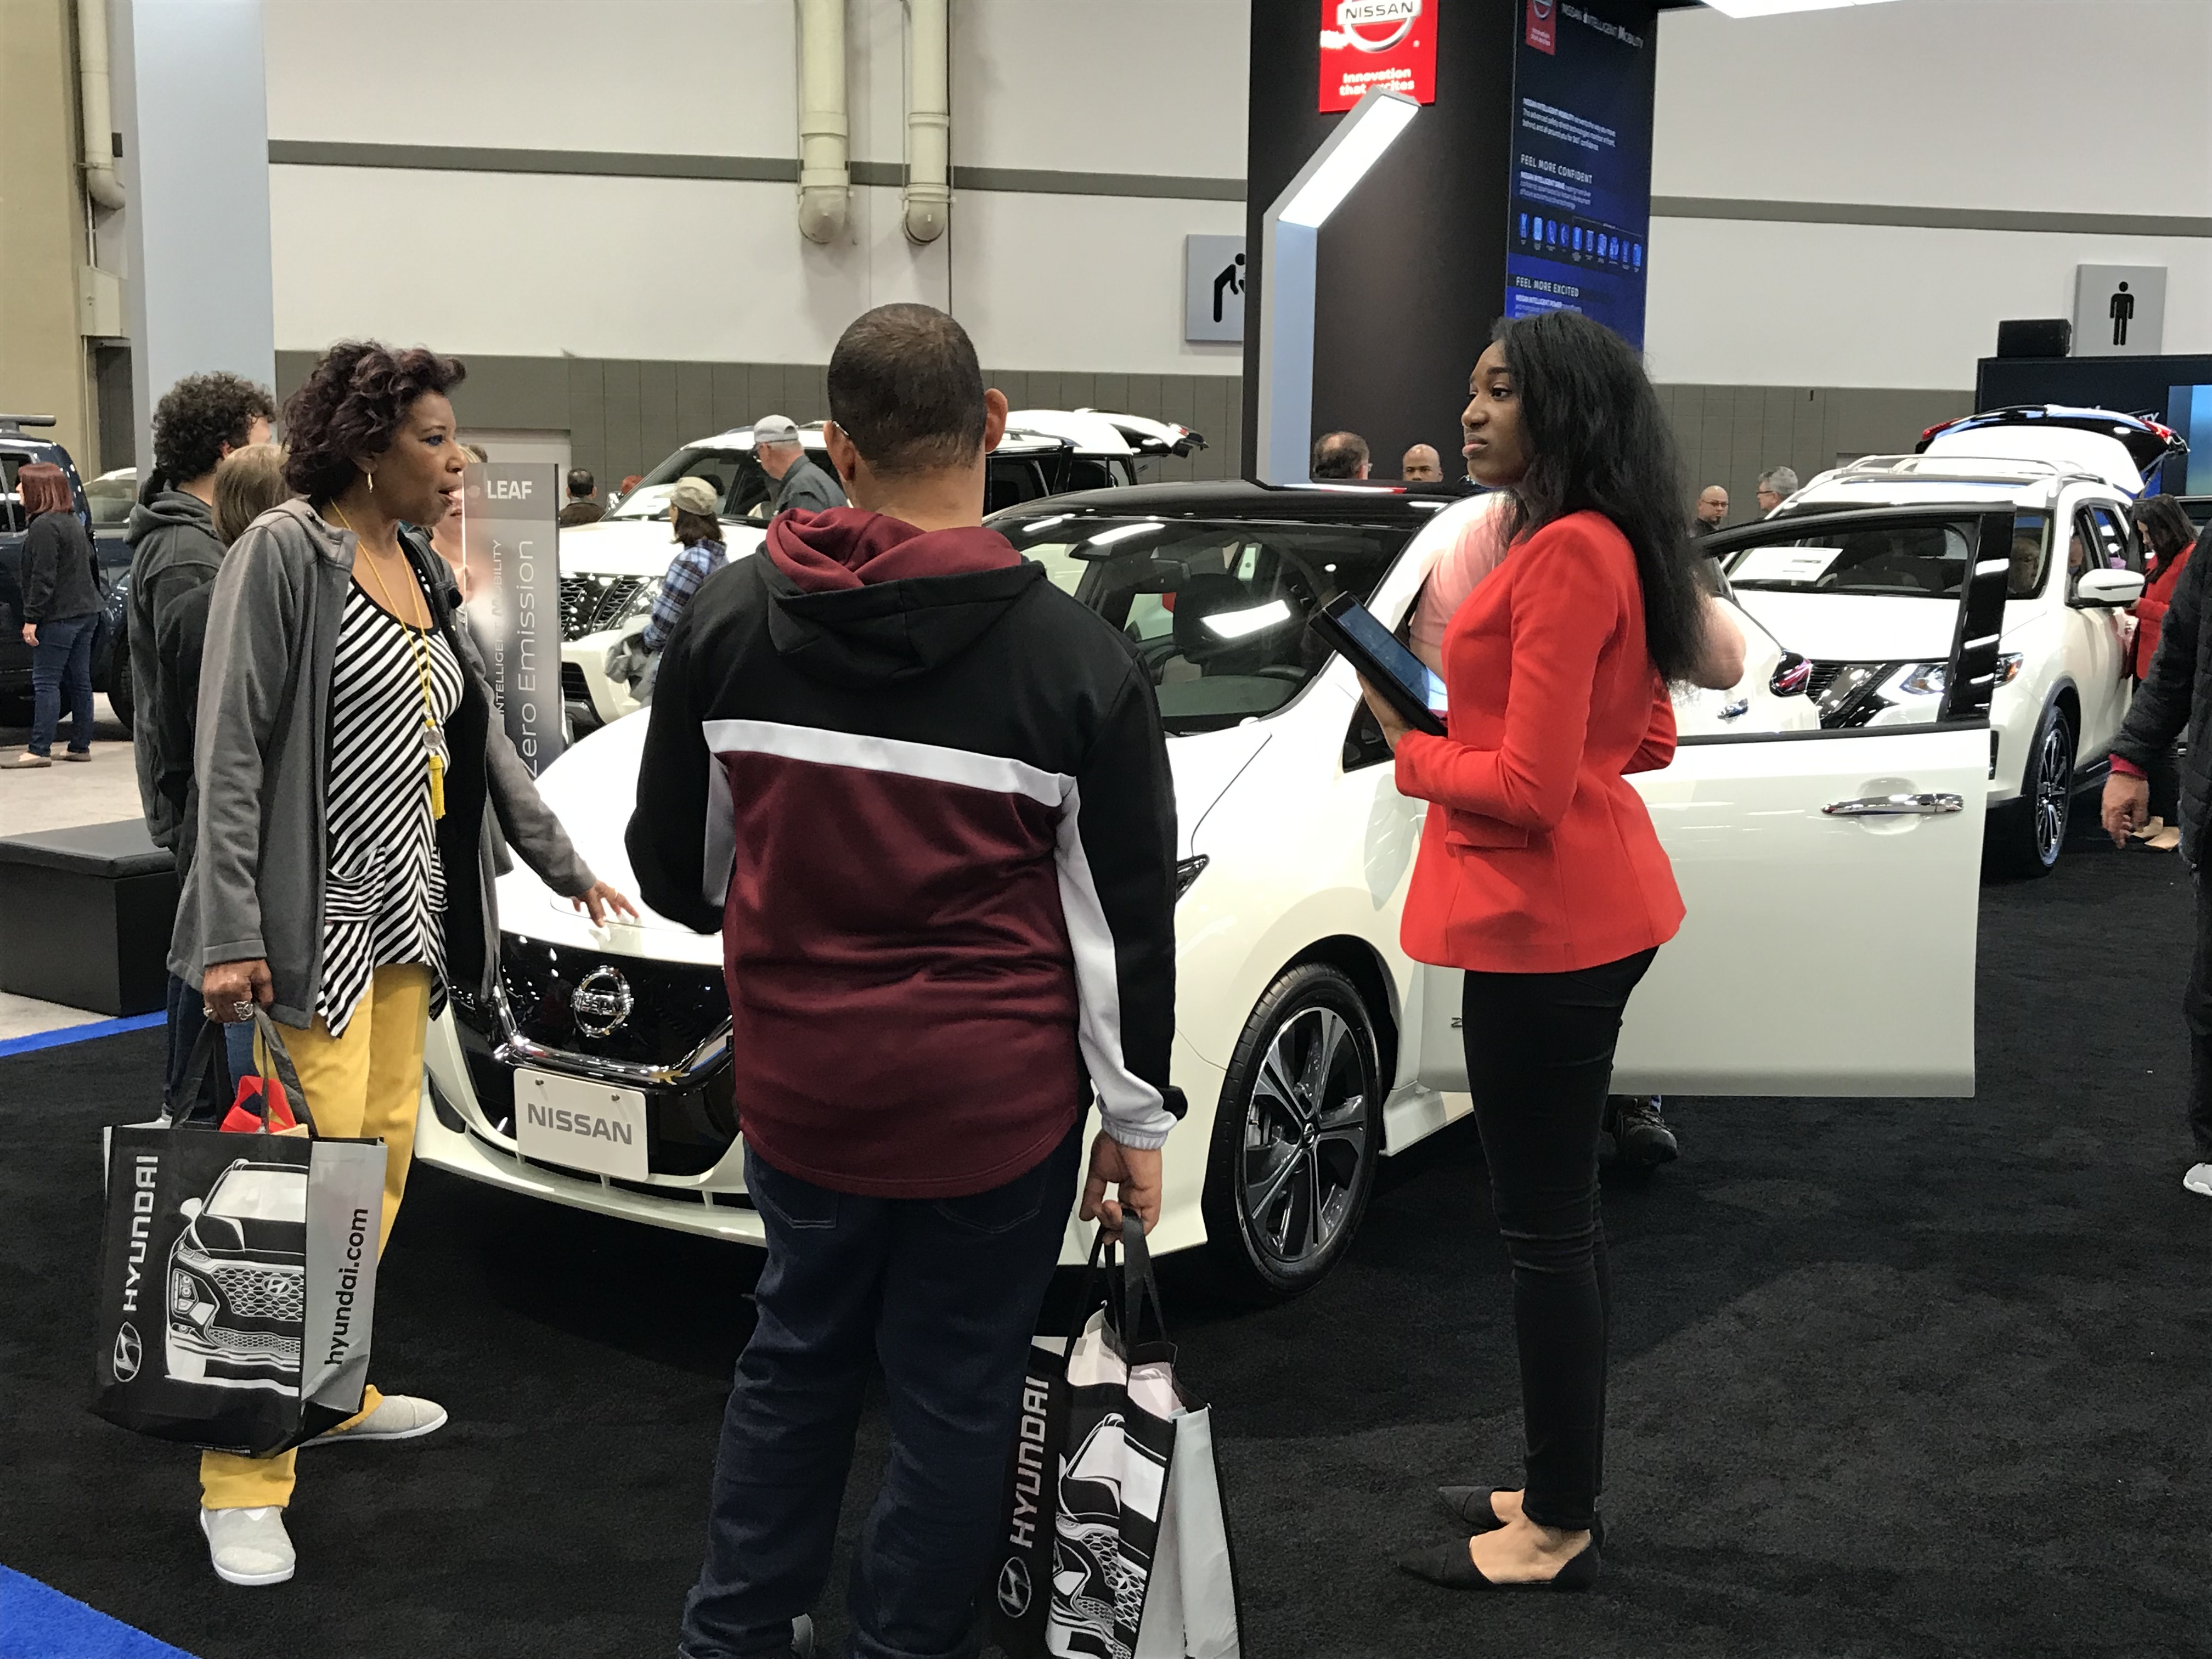 Dallas Auto Show Provides Consumers with Full Experiential Event